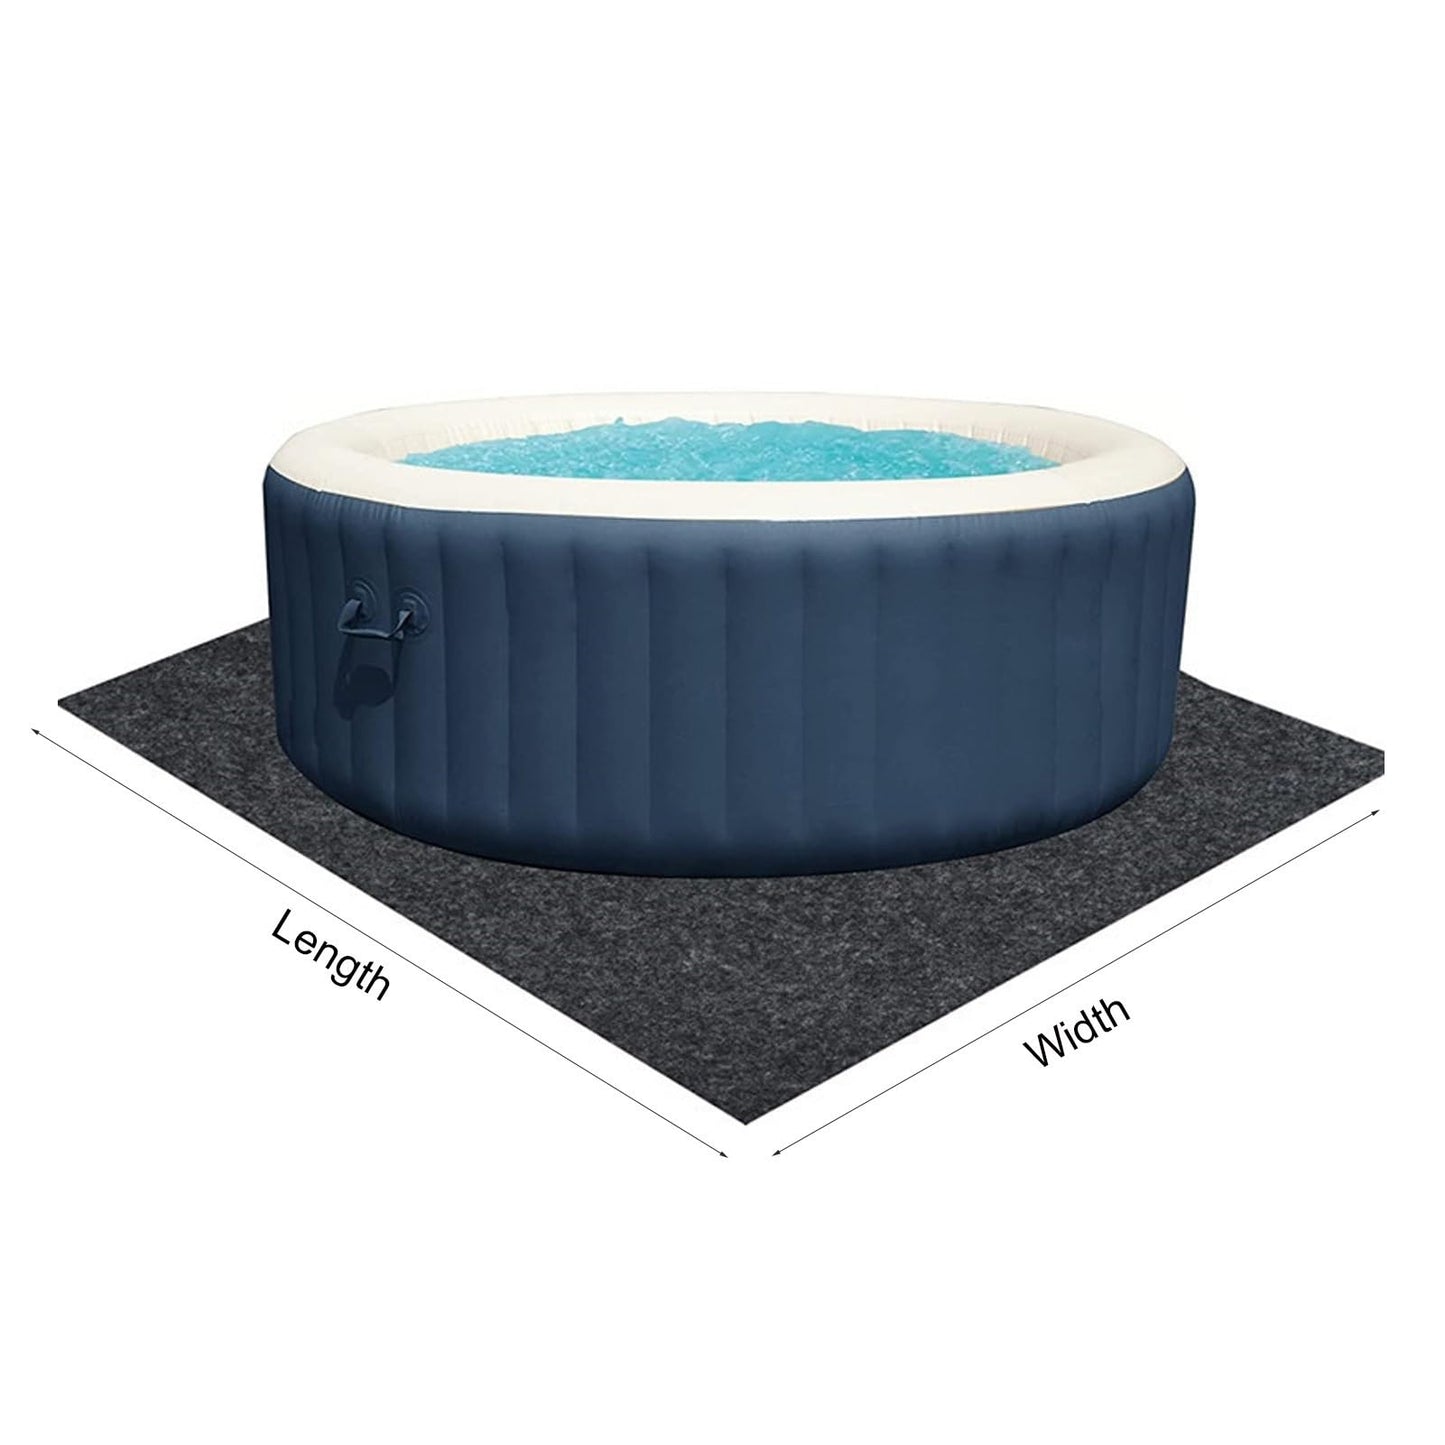 ZGSYH Pool Pads for Above Ground Pool - Pool Floor Liner Pad,Pool Ground Cloth,Portable Spa Pool Accessories for Outdoor or Indoor (Color : 91" L x 79" W)